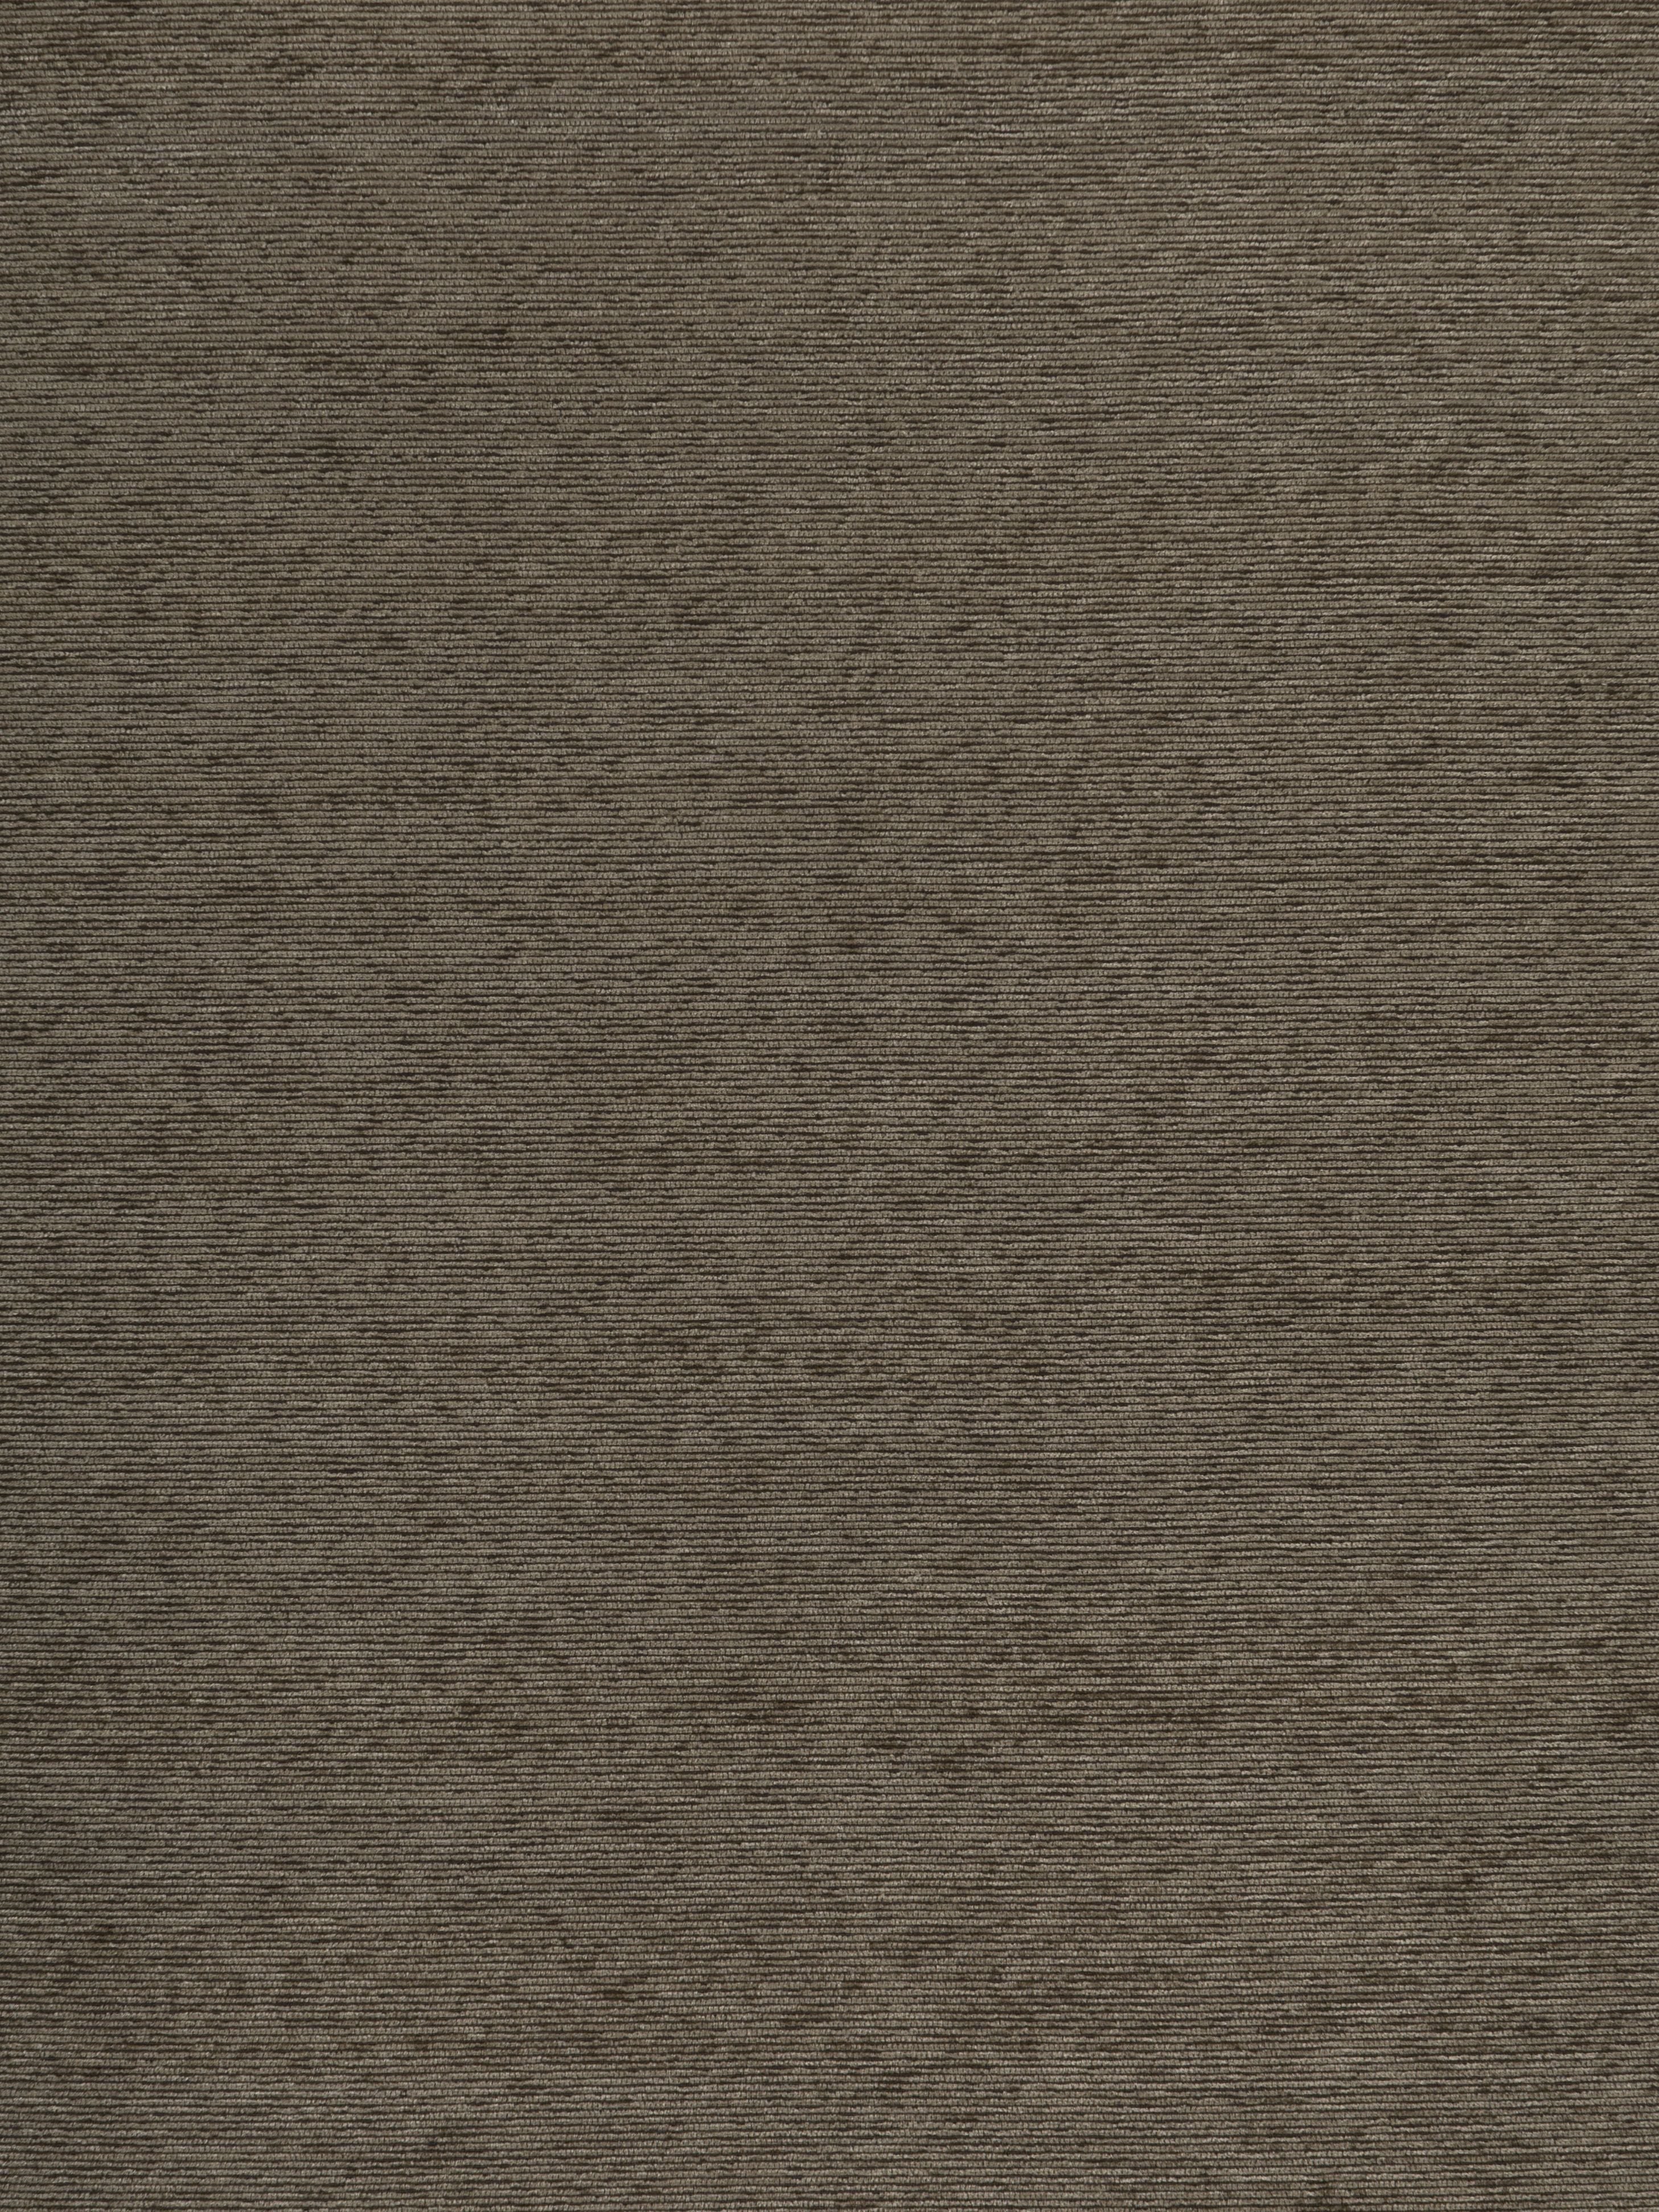 Silk Chenille Plain fabric in taupe color - pattern number RH 00171496 - by Scalamandre in the Old World Weavers collection